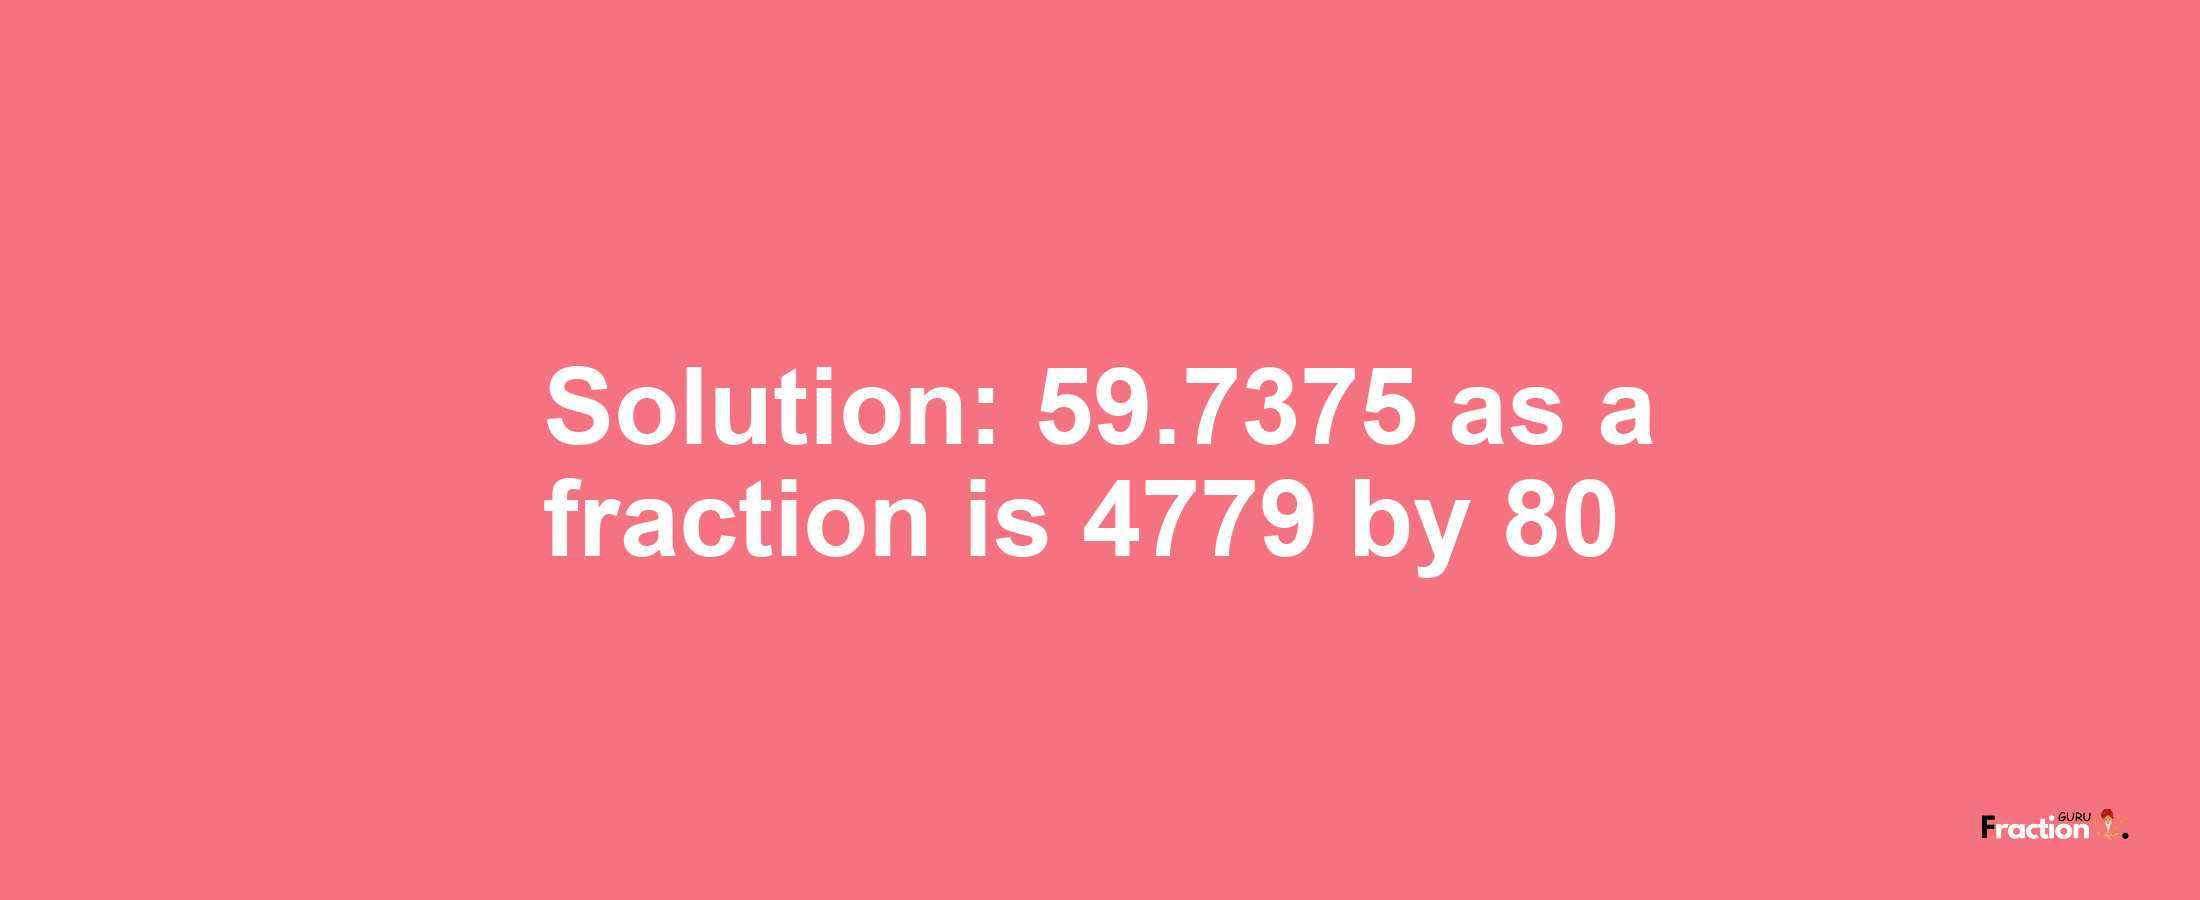 Solution:59.7375 as a fraction is 4779/80